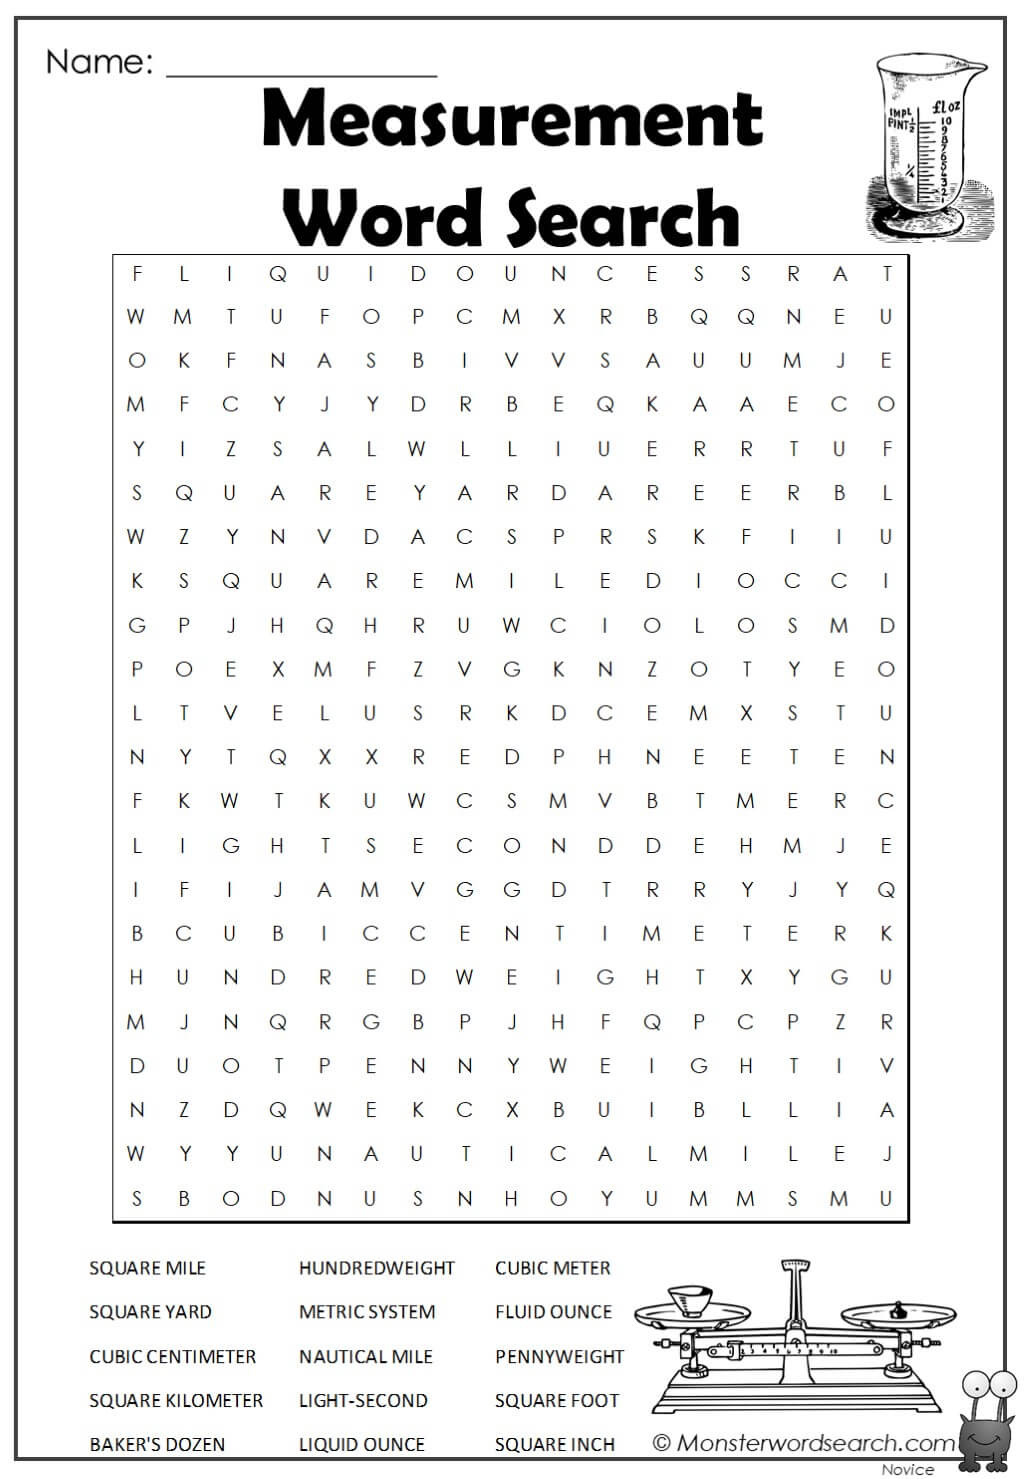 measurement word search